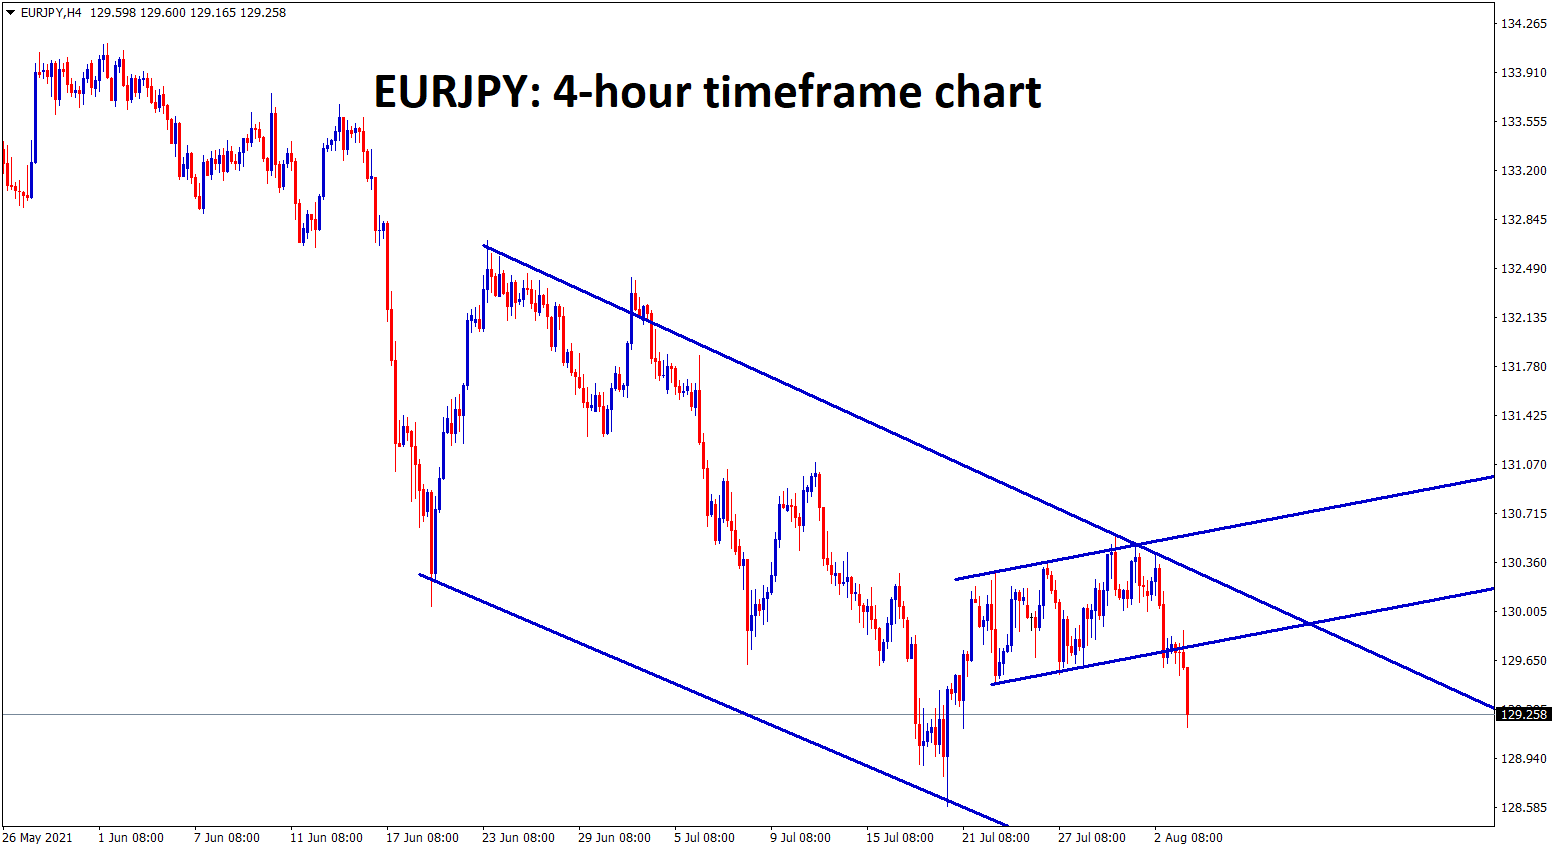 EURJPY is falling in a descending channel and has broken the bottom of the range